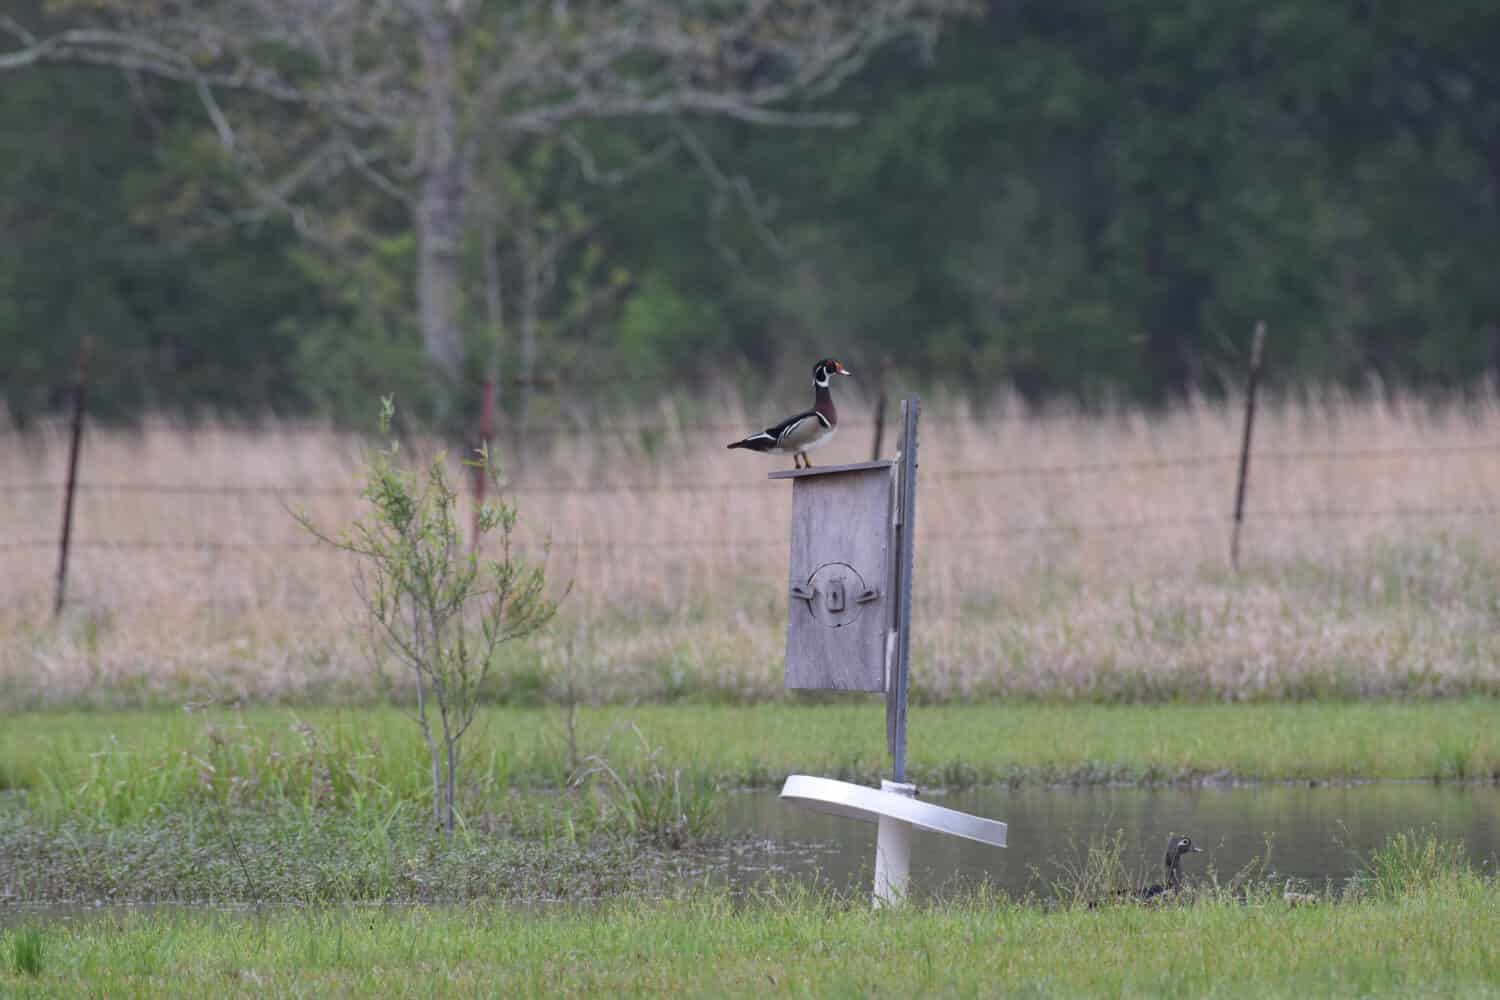 A pair of wood ducks in a pond getting the nest ready in a wooden box.